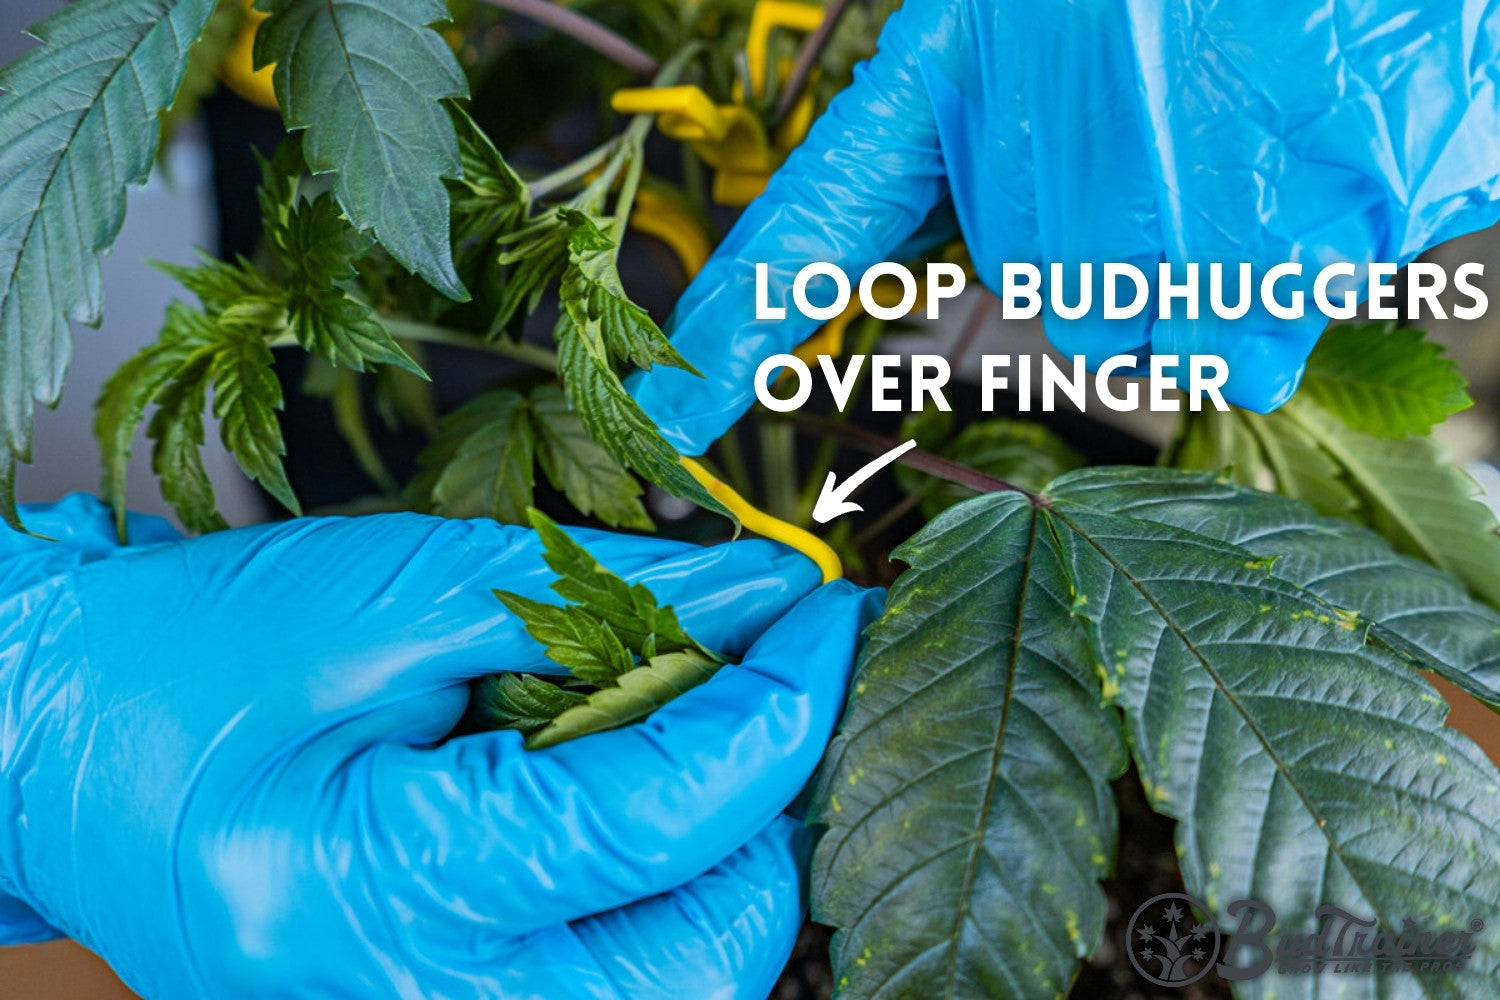 Person wearing blue gloves demonstrating how to loop BudHuggers over their finger while training a cannabis plant branch, with the text “Loop BudHuggers Over Finger” and an arrow pointing to the BudHuggers, and the BudTrainer logo in the bottom right corner.